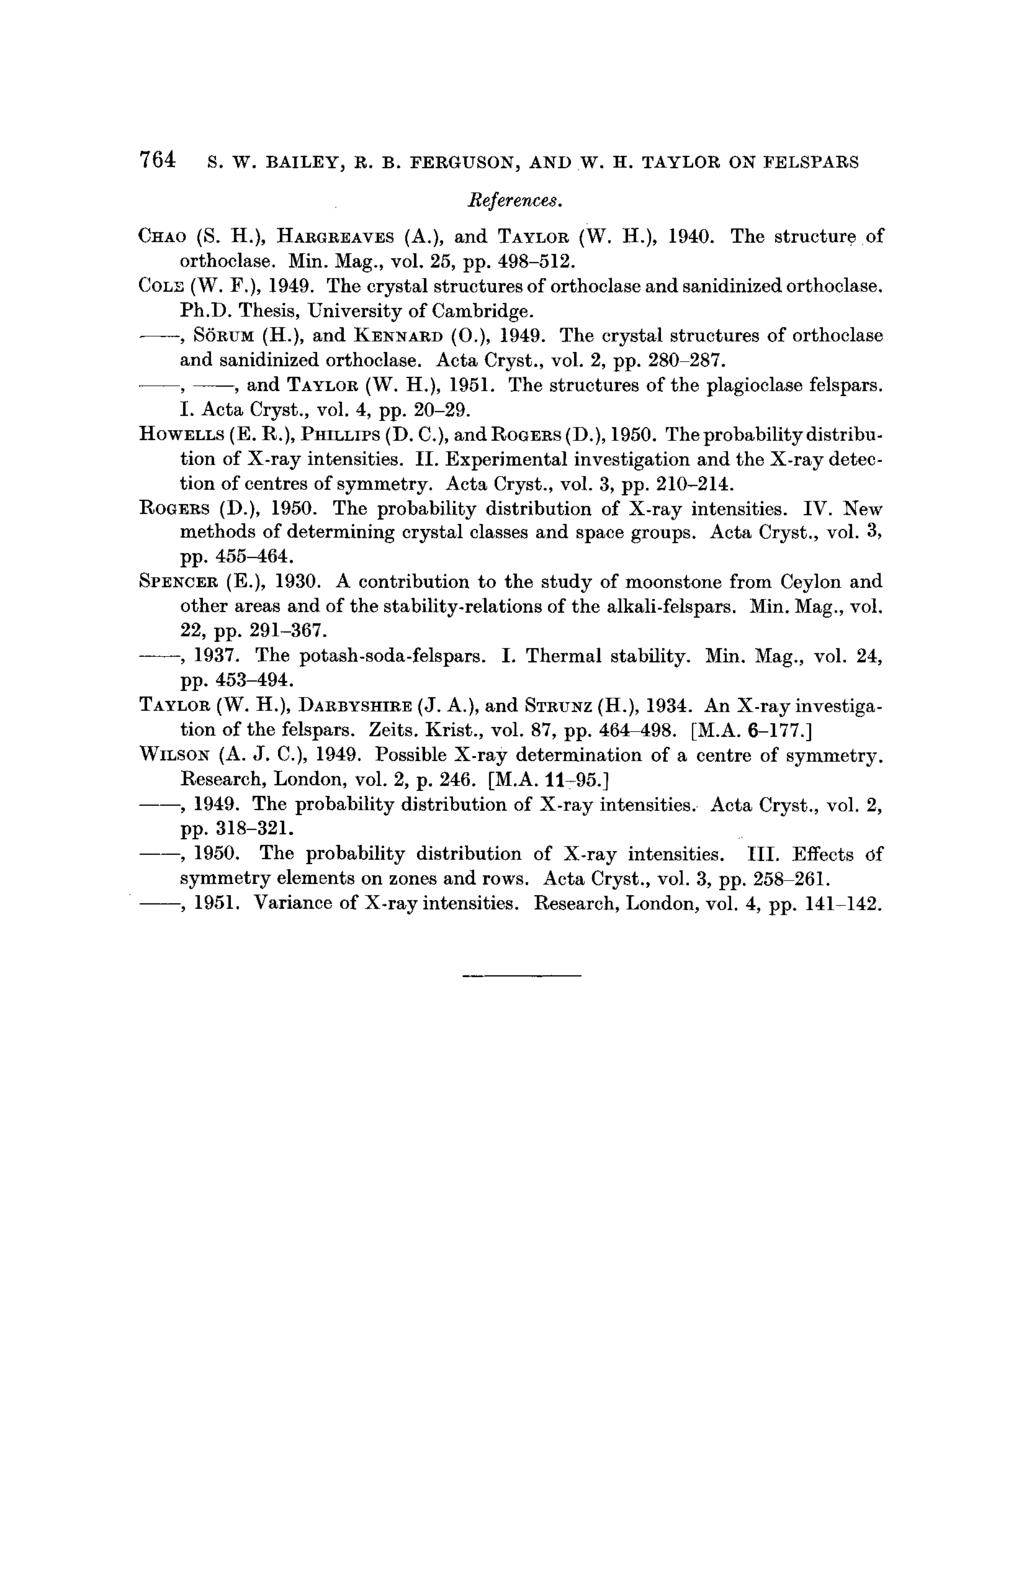 764 s.w. BAILEY~ R. B. FERGUSON, AND W. H. TAYLOR ON FELSPARS References. CHAO (S. H.), HARGREAVES (A.), and TAYLOR (W. H.), 1940. The structure of orthoclase. Min. Mag., vol. 25, pp. 498-512.